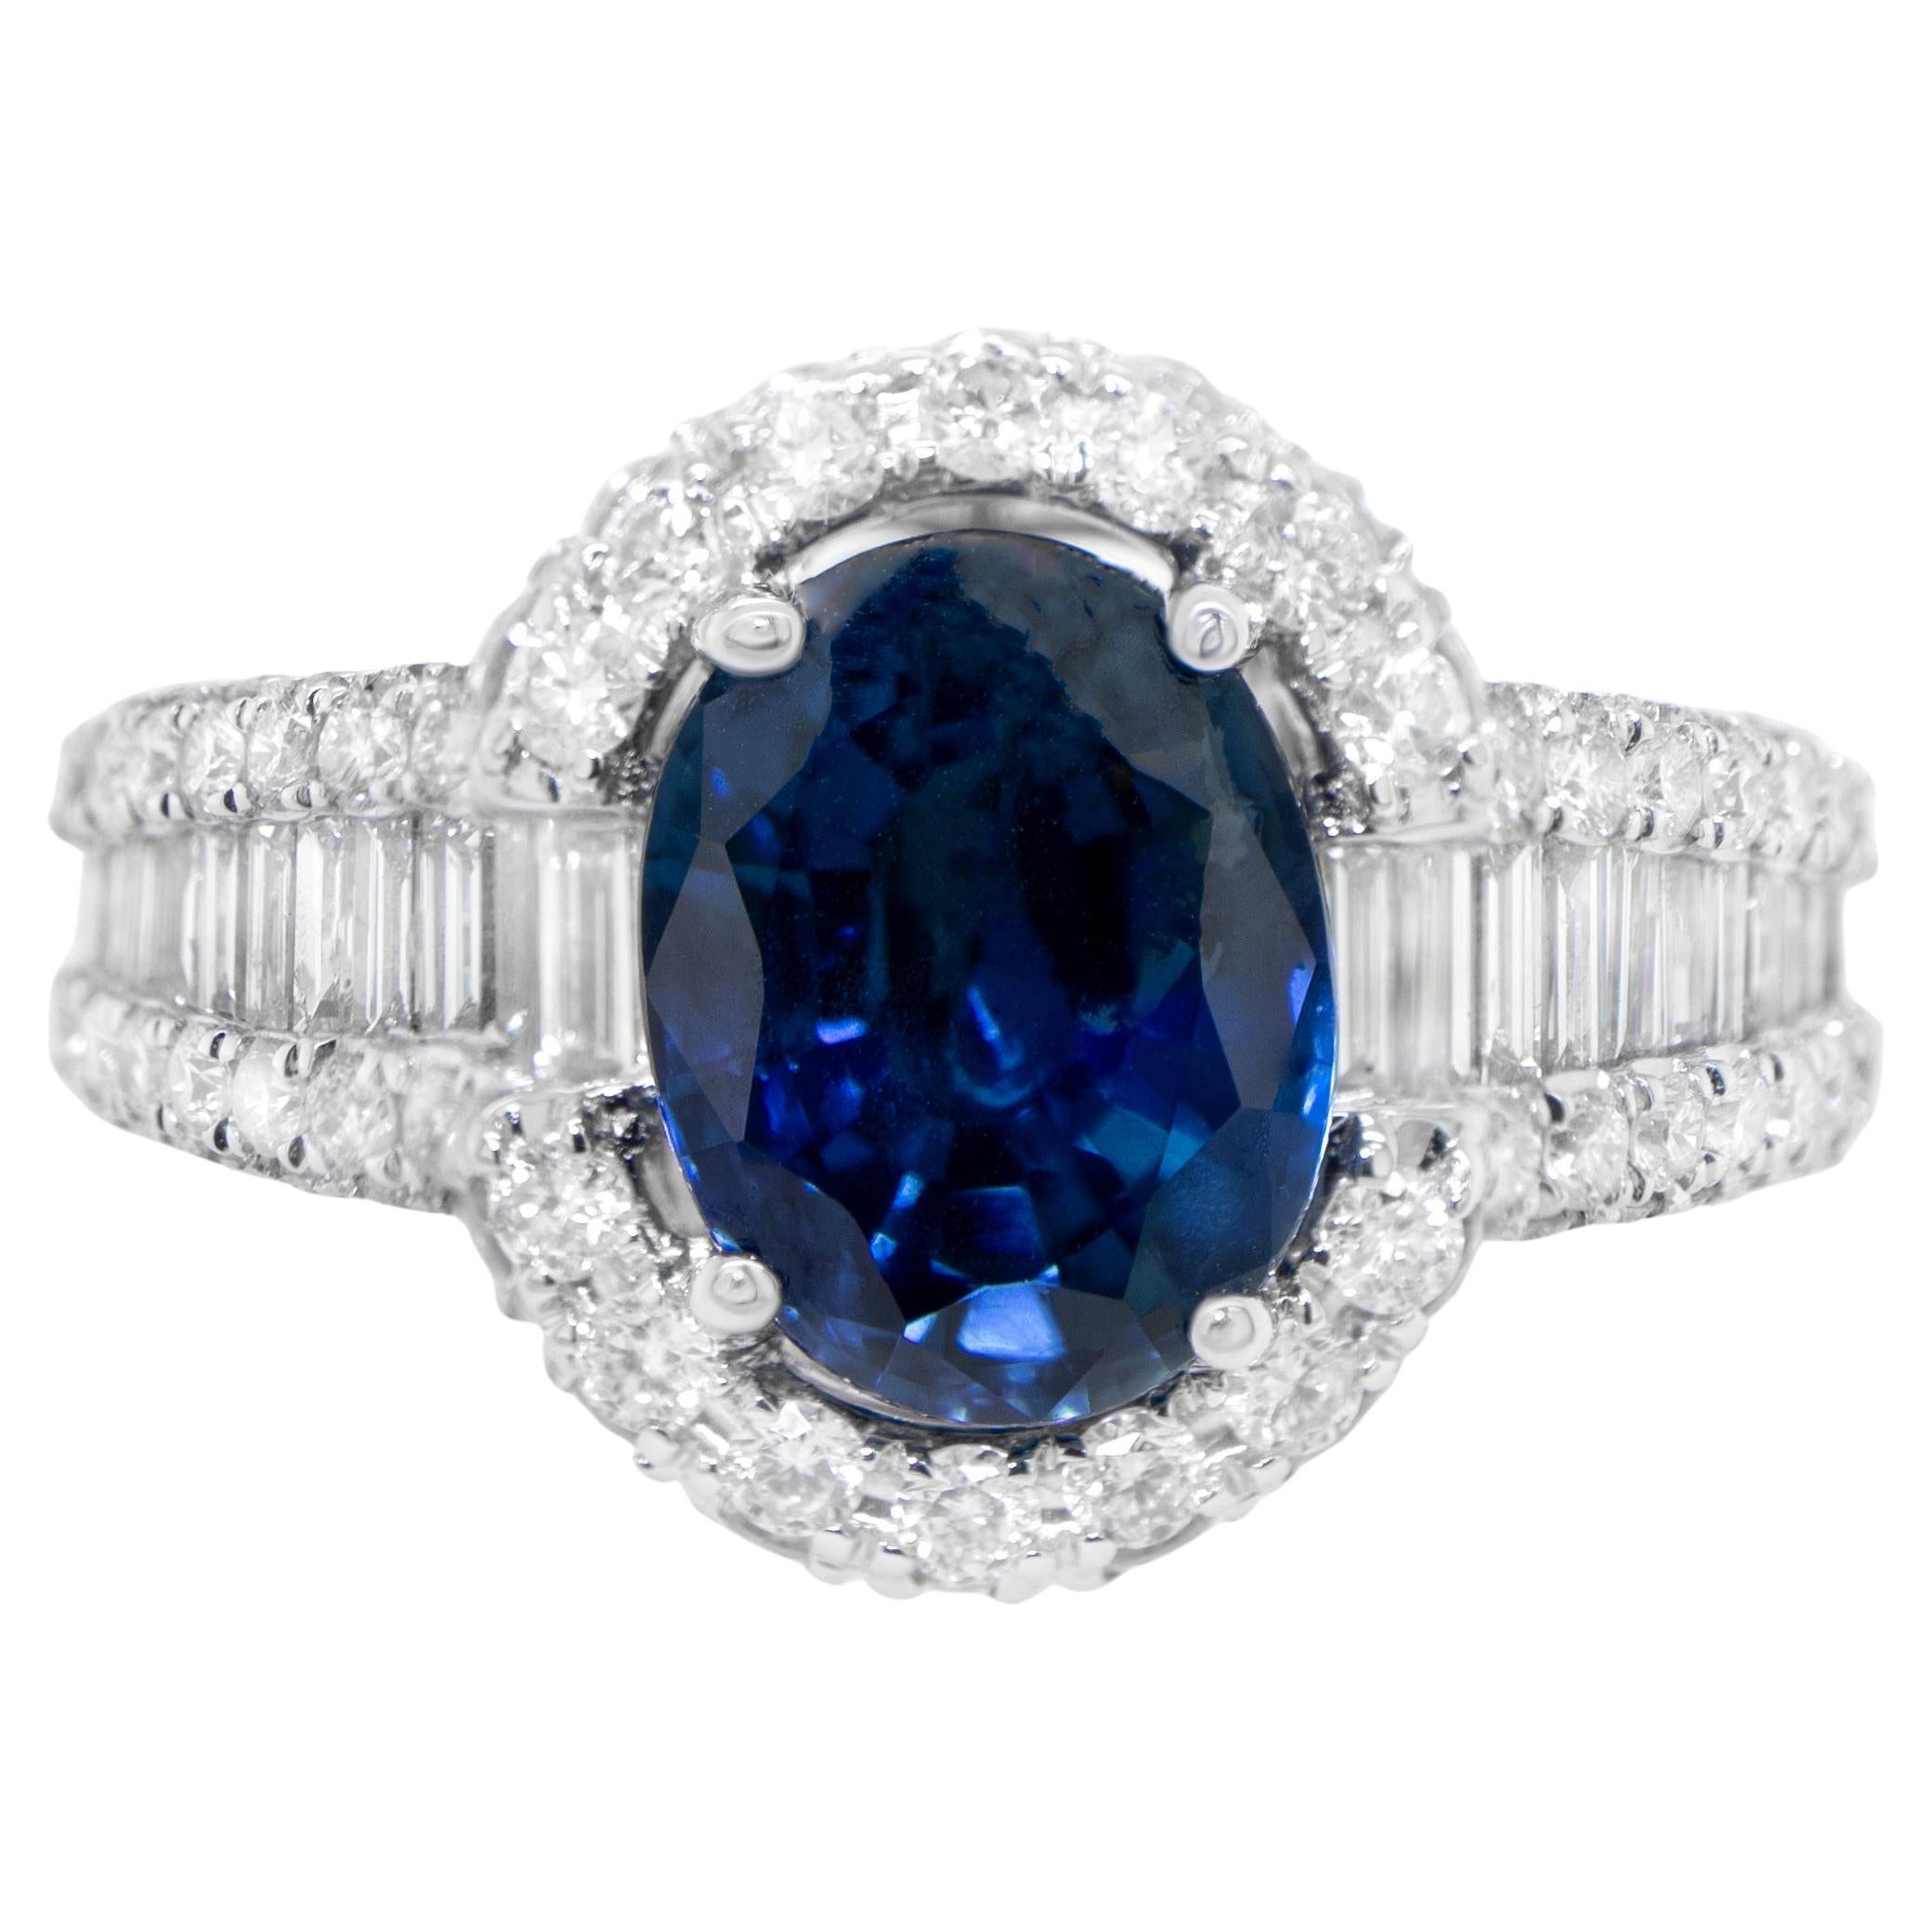 Blue Sapphire Ring Diamond Setting 4.67 Carats 18K Gold For Sale